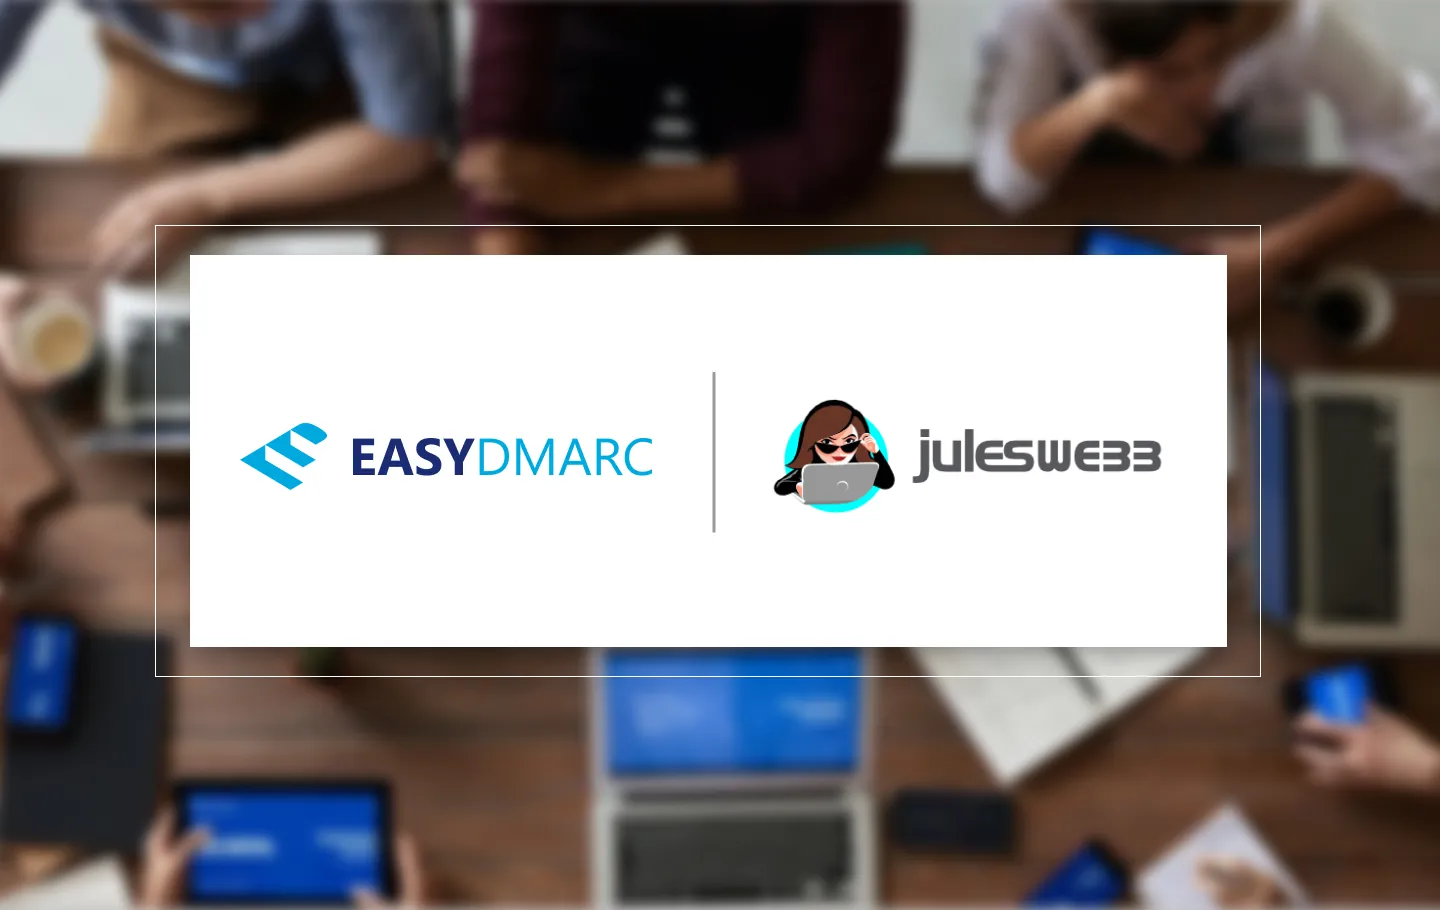 JulesWeb and EasyDMARC logos next to each other